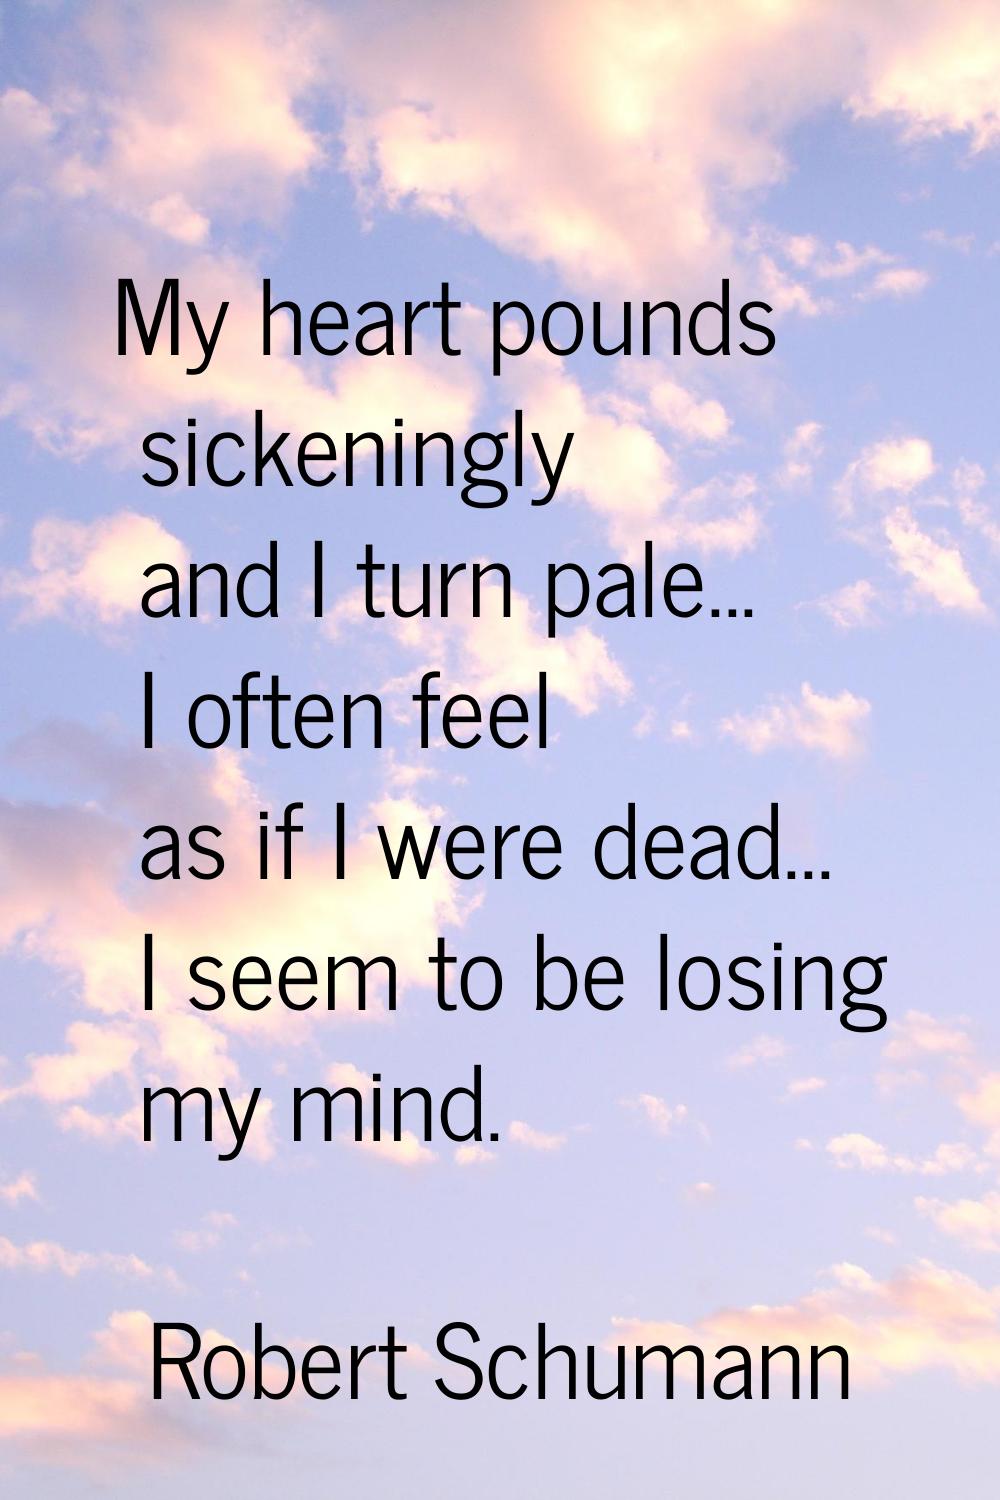 My heart pounds sickeningly and I turn pale... I often feel as if I were dead... I seem to be losin